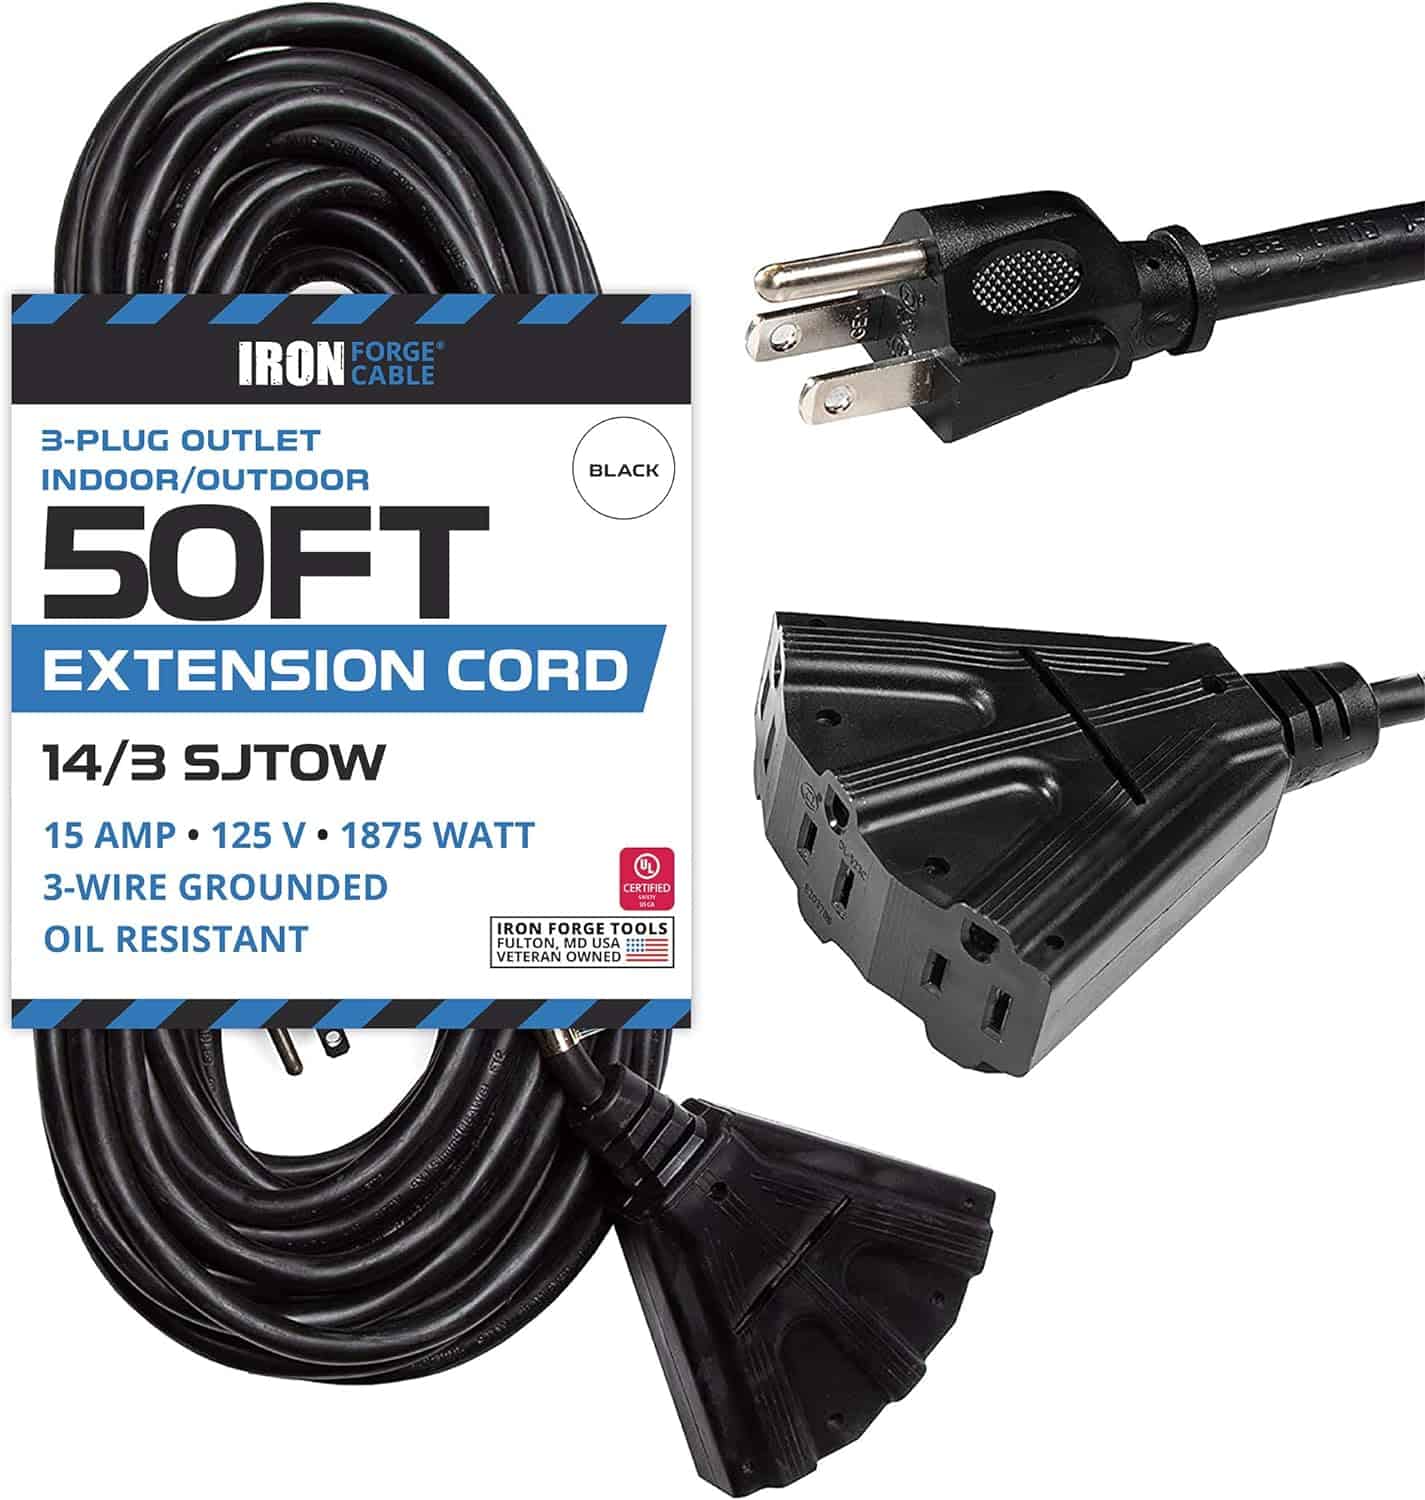 50-Ft-Black-Oil-Resistant-Extension-Cord-with-3-Electrical-Power-Outlets-for-Farms-and-Ranches-14-3-SJTOW-Heavy-Duty-Outdoor-Cable-with-3-Prong-Grounded-Plug-for-Safety